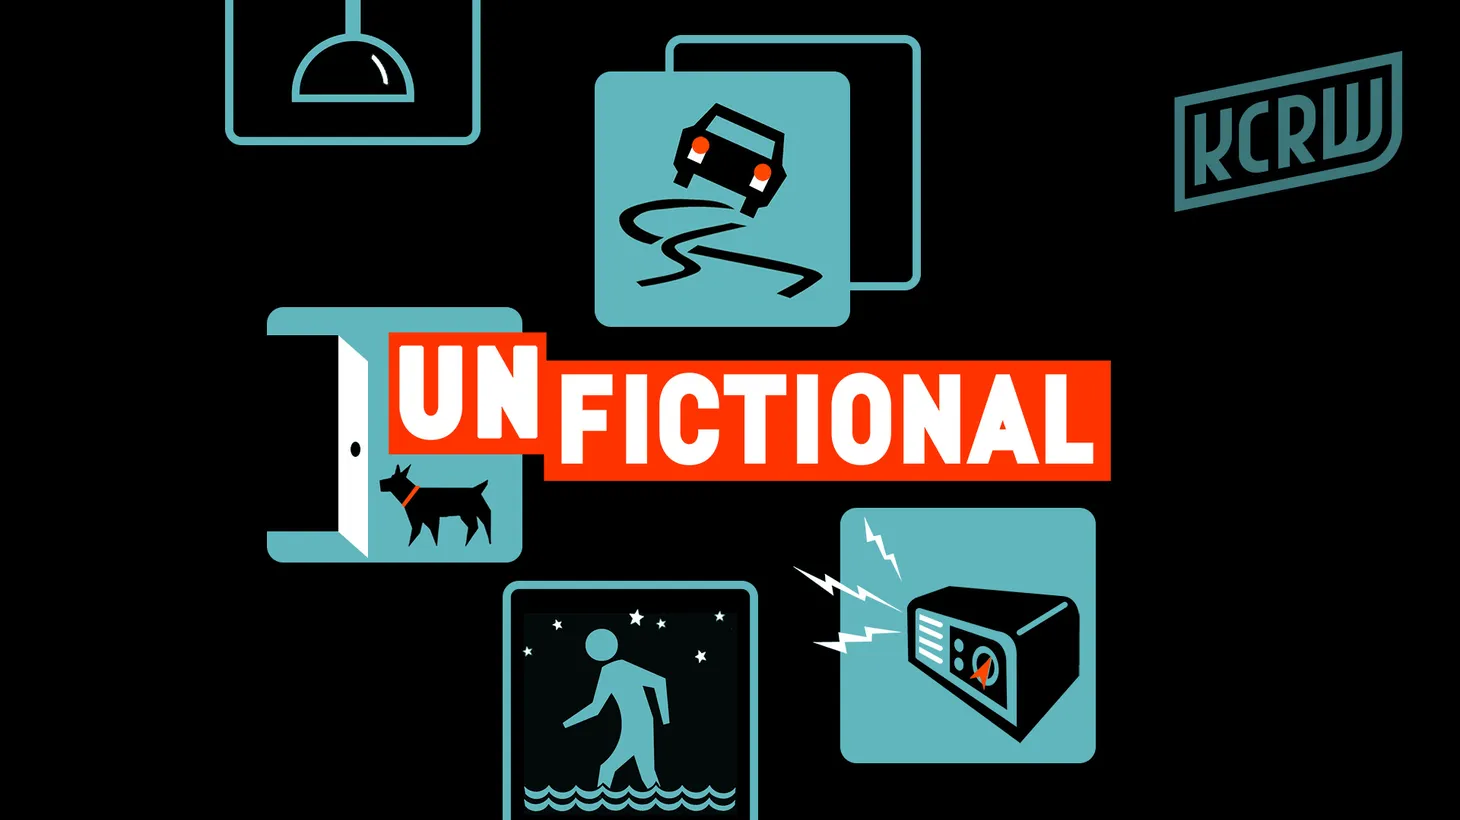 A holiday broadcast presentation of UnFictional, featuring some of the show's best stories.